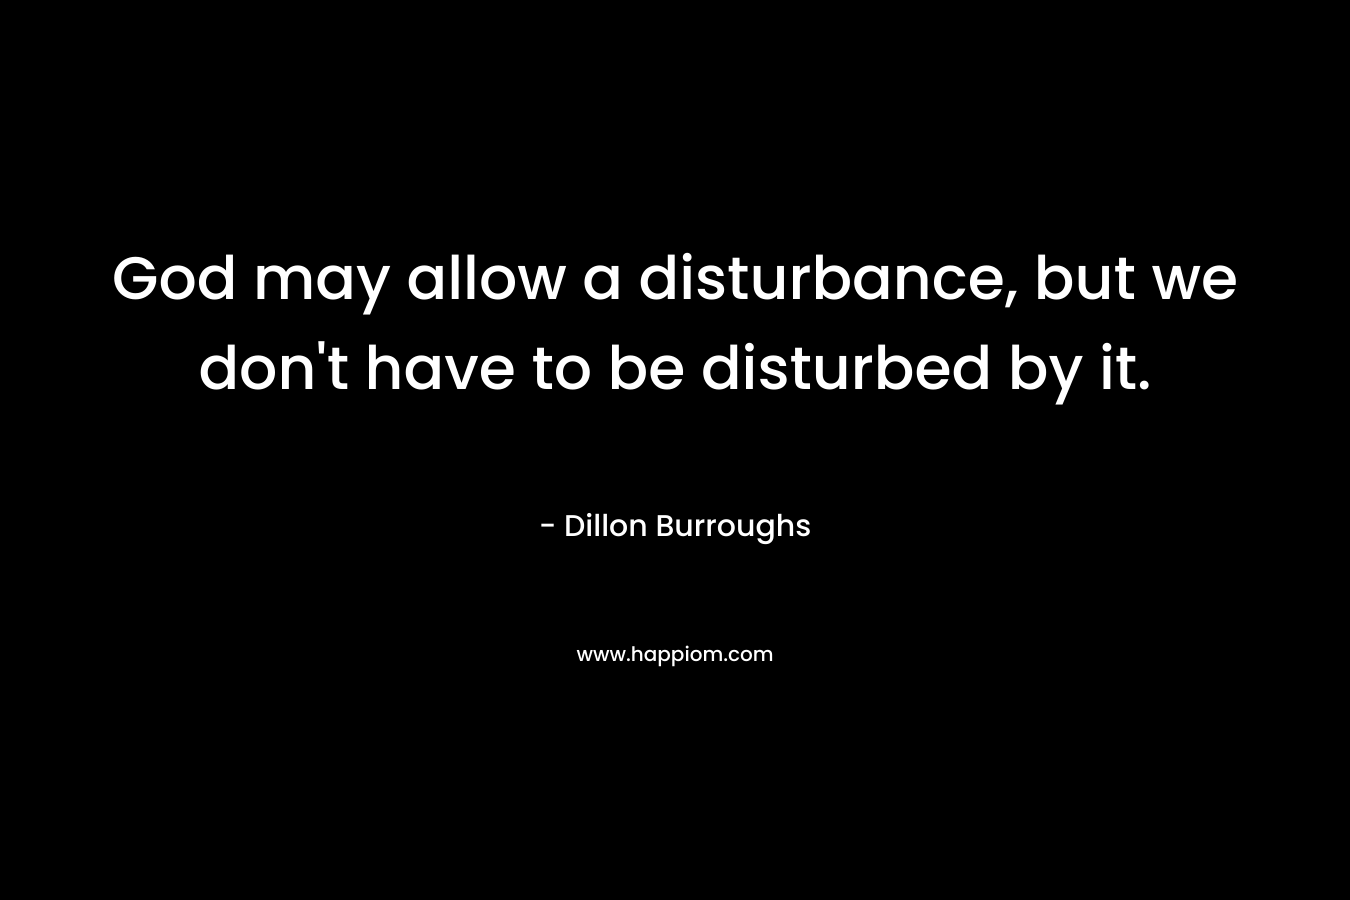 God may allow a disturbance, but we don’t have to be disturbed by it. – Dillon Burroughs